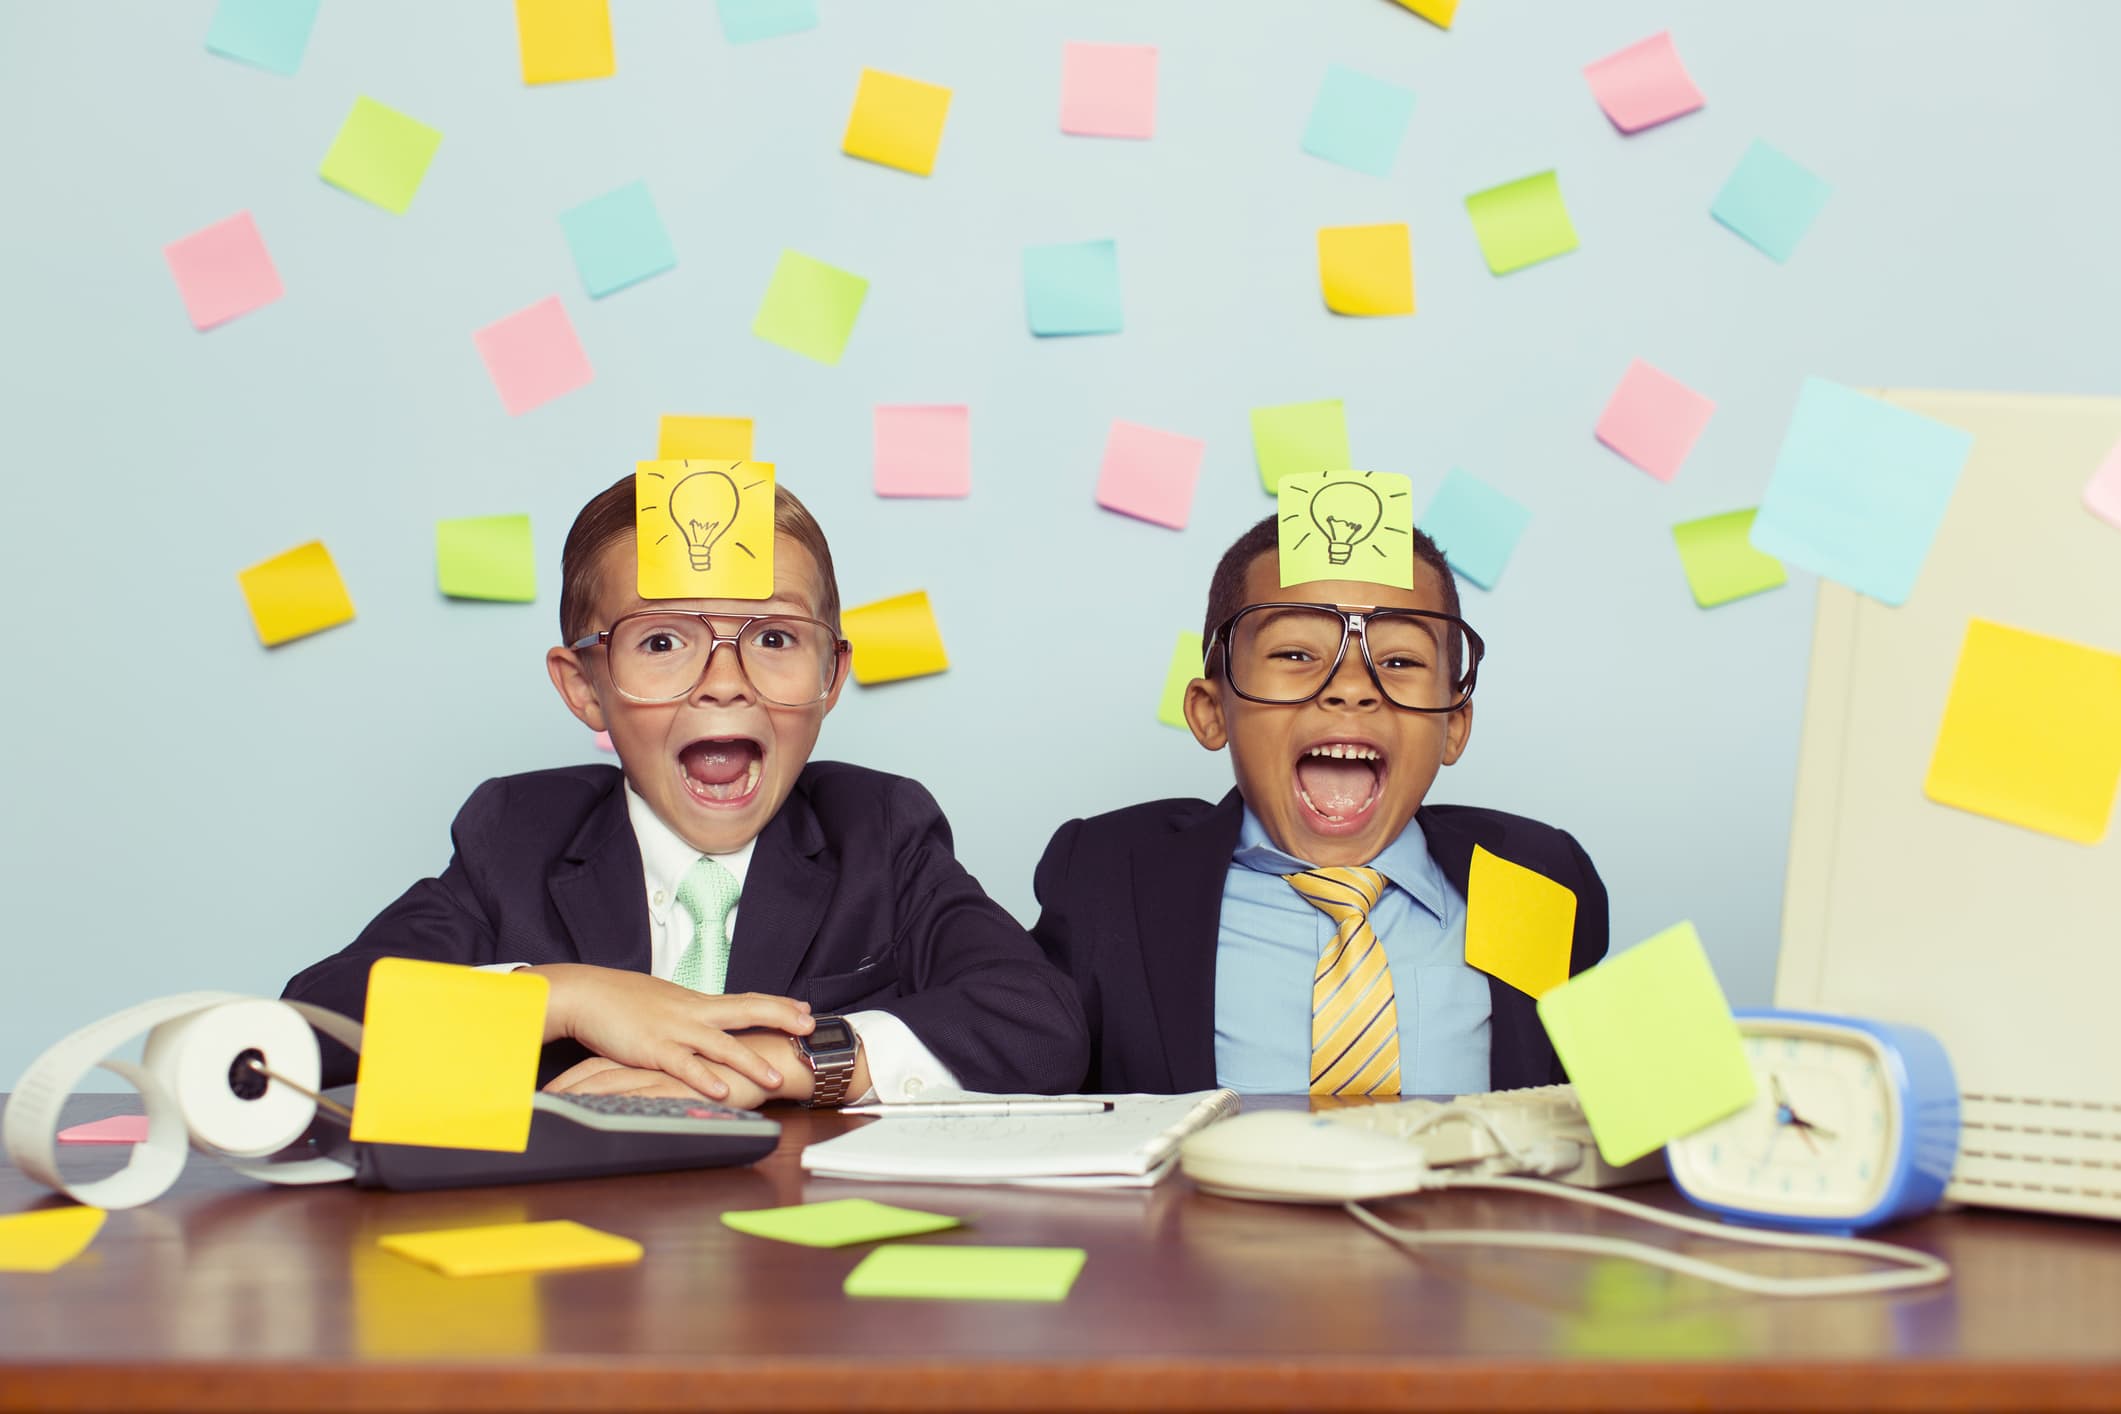 Two young businessmen sit at their office computer desk with ecstatic expressions on their faces and light bulb sticky notes on their foreheads. They are excited as they have thought of new business ideas. They are wearing a suit and tie and glasses.